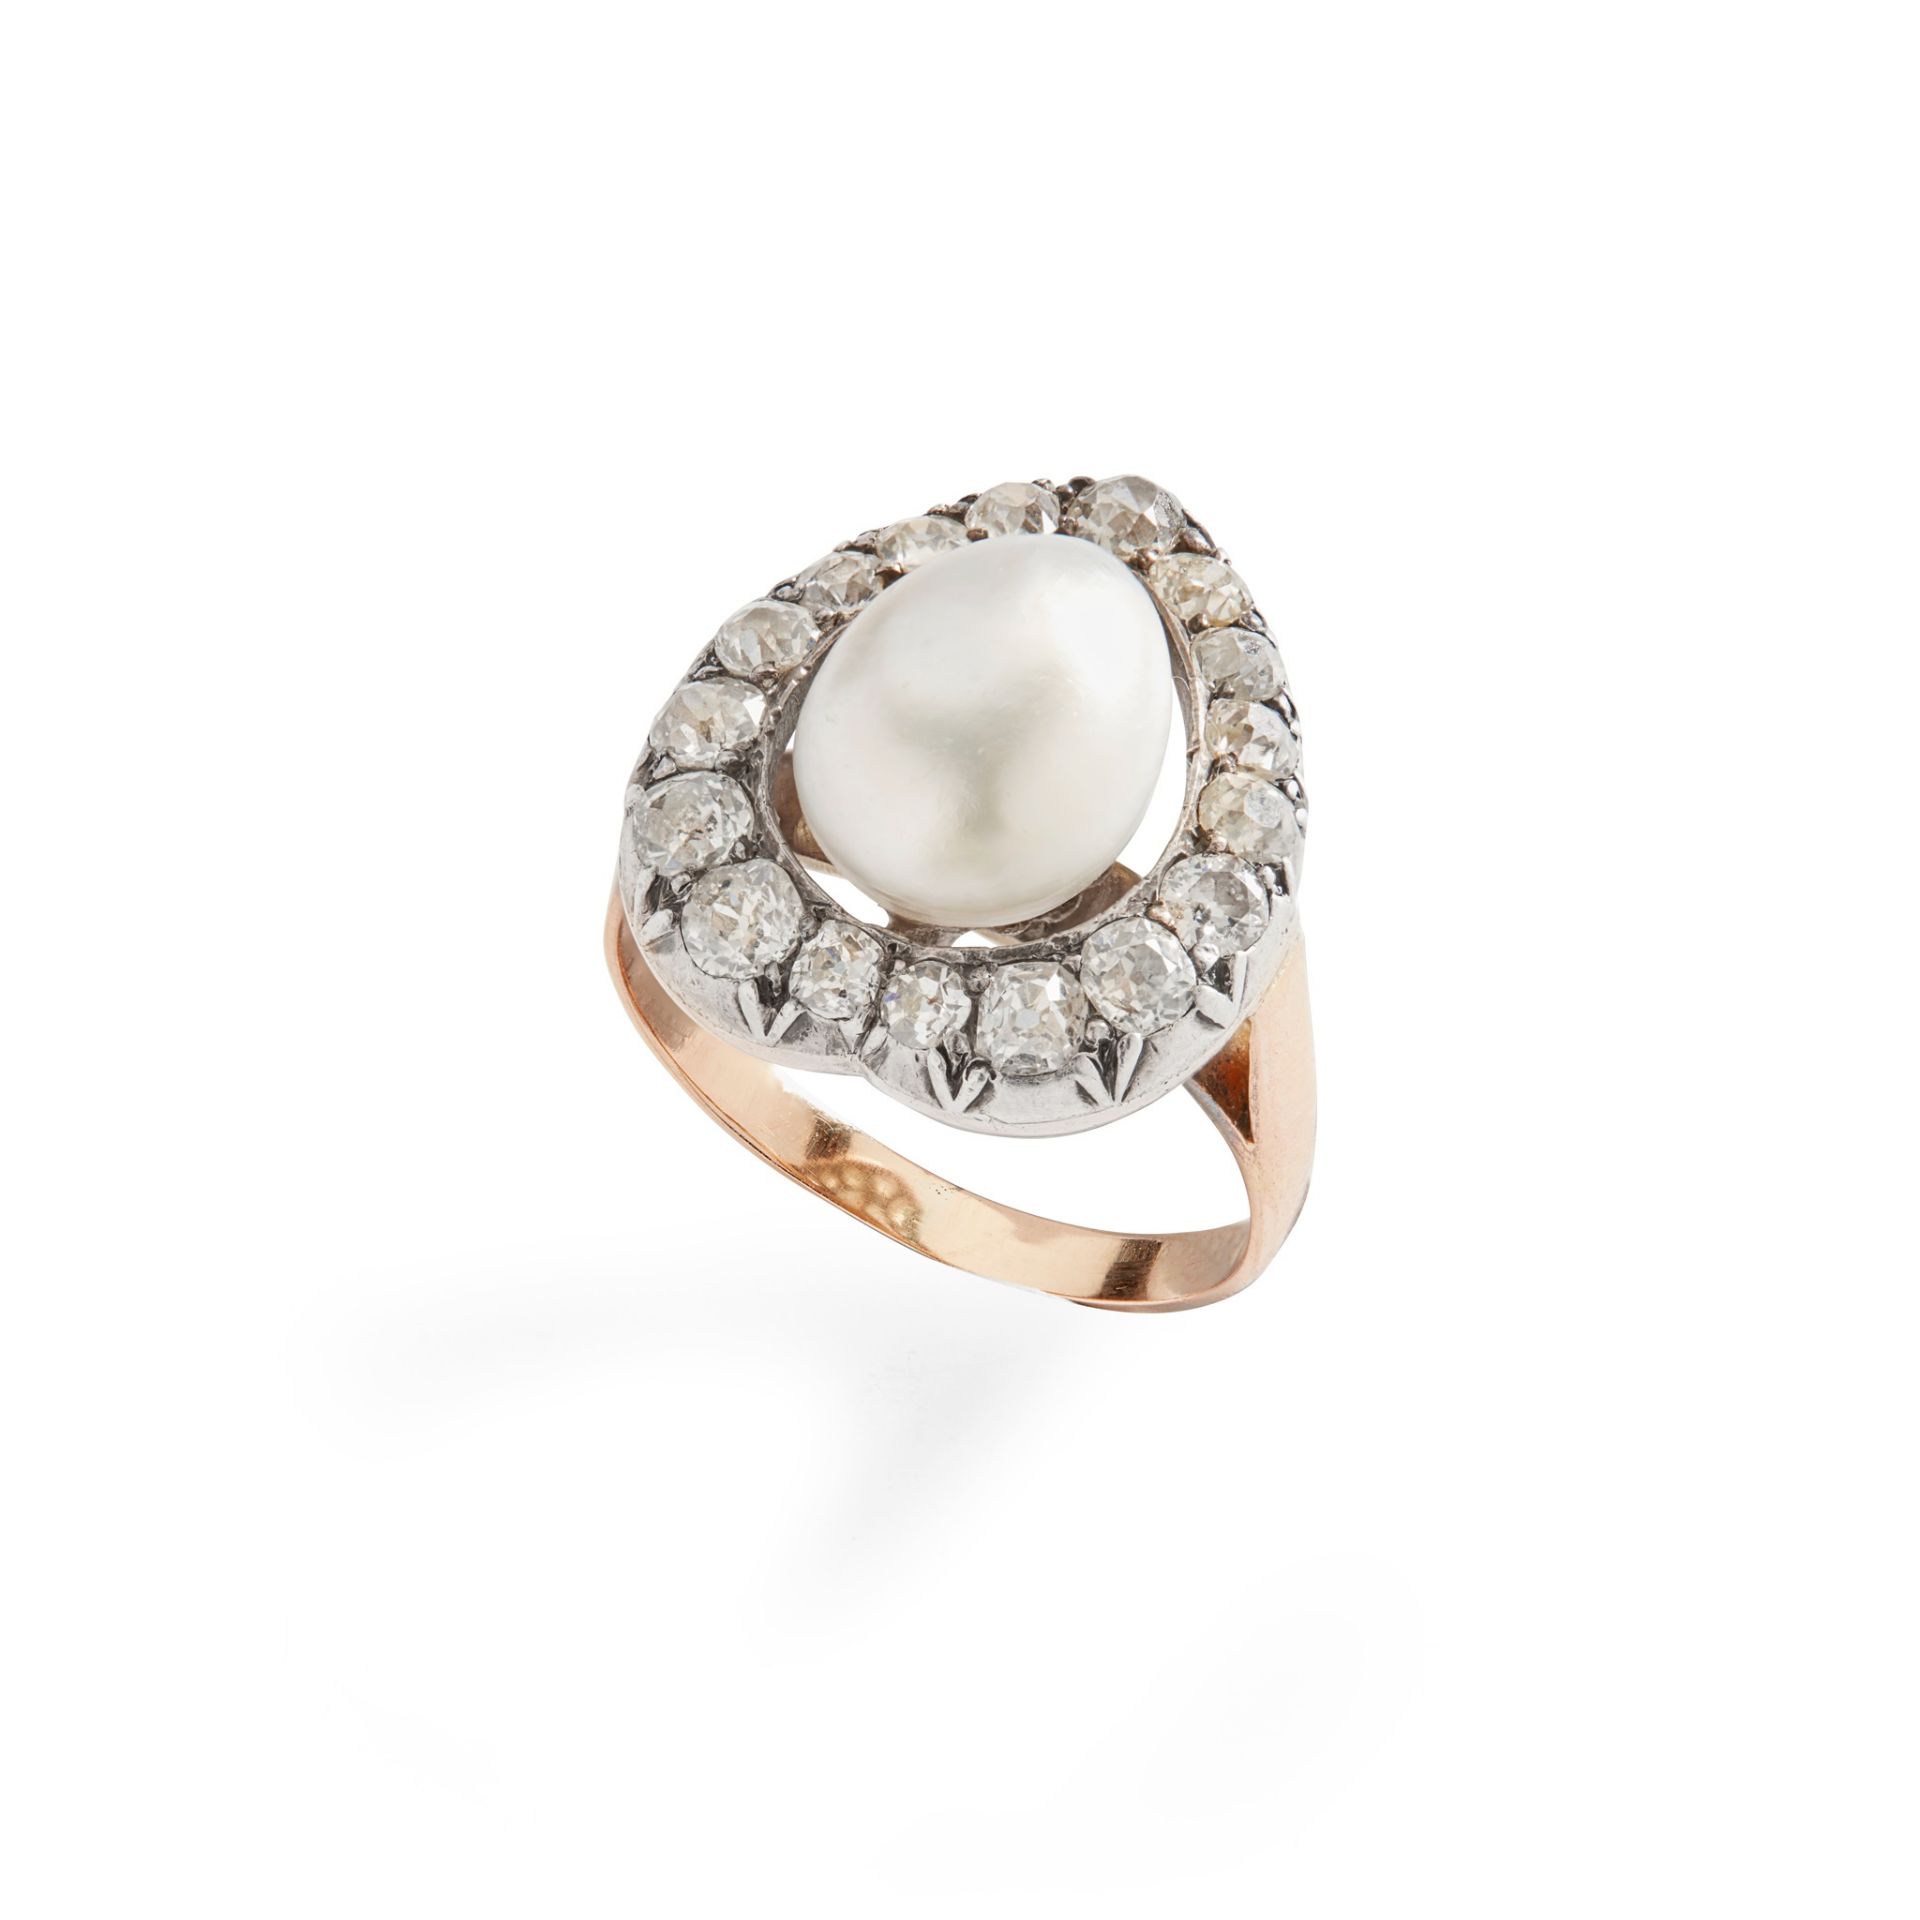 A pearl and diamond cluster ring